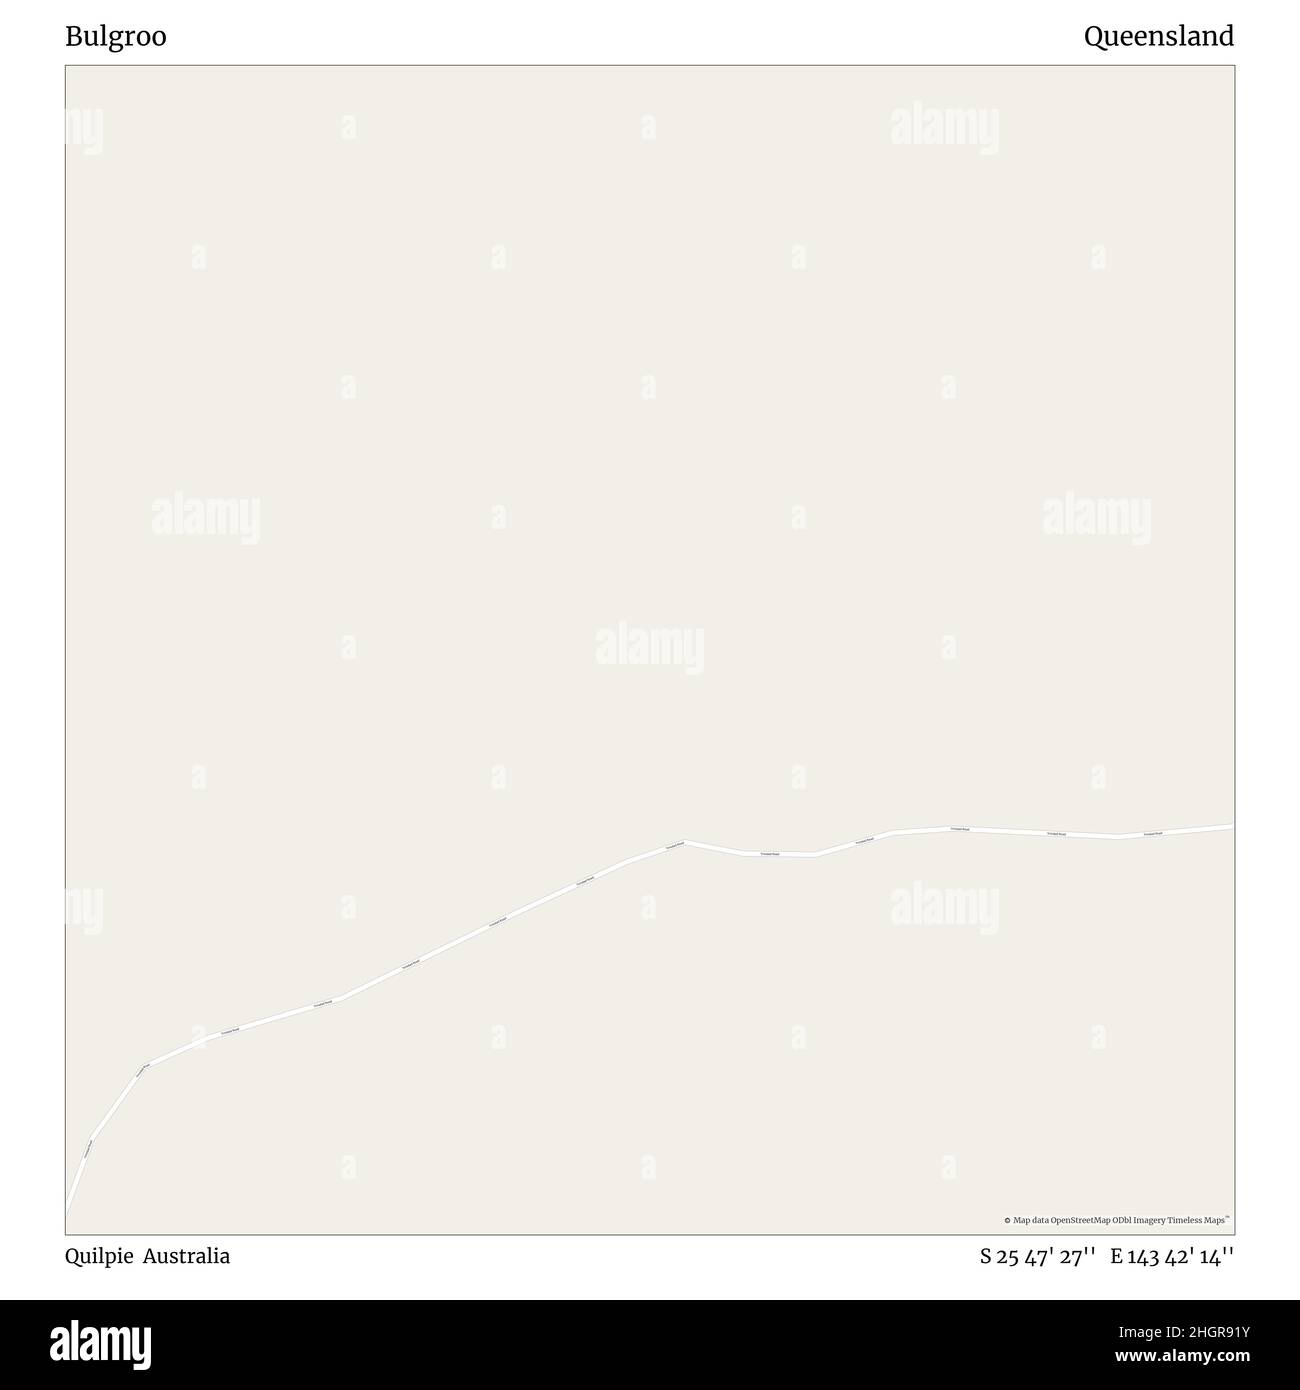 Bulgroo, Quilpie, Australia, Queensland, S 25 47' 27'', E 143 42' 14'', map, Timeless Map published in 2021. Travelers, explorers and adventurers like Florence Nightingale, David Livingstone, Ernest Shackleton, Lewis and Clark and Sherlock Holmes relied on maps to plan travels to the world's most remote corners, Timeless Maps is mapping most locations on the globe, showing the achievement of great dreams Stock Photo